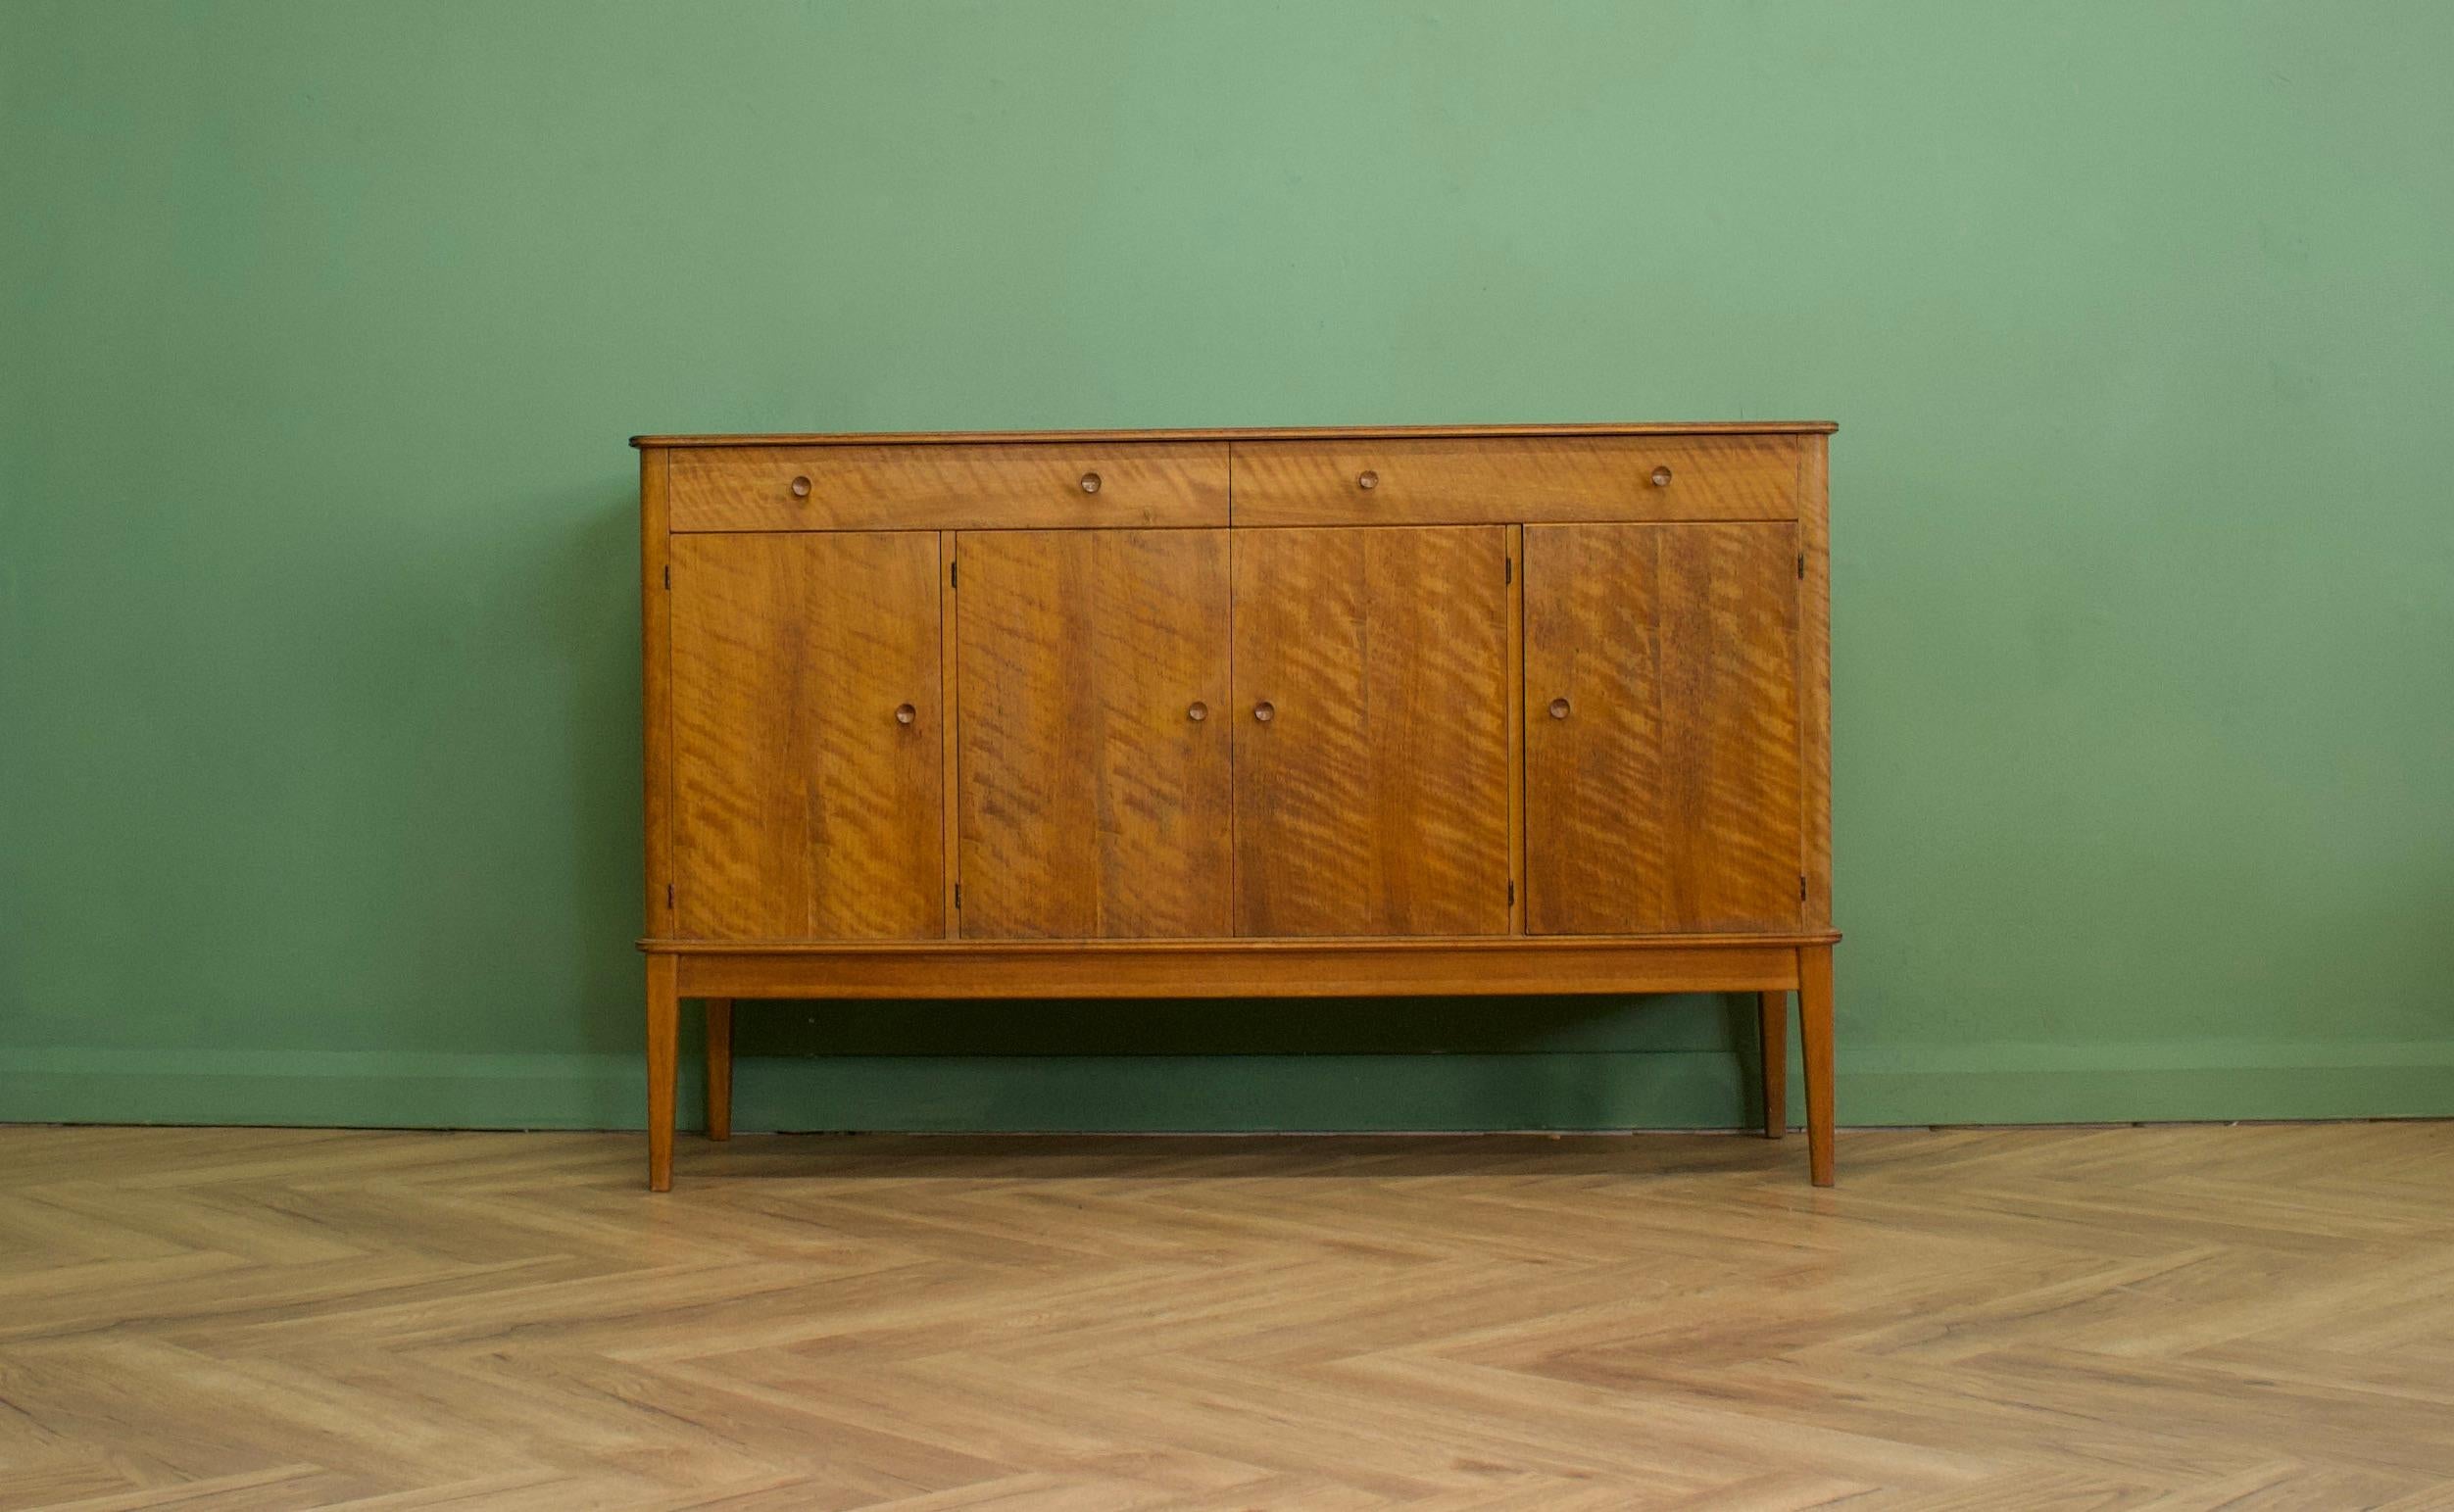 A walnut sideboard from Gordon Russell - circa 1960s
Featuring three cupboards and two drawers - the cupboards each have a removable shelf